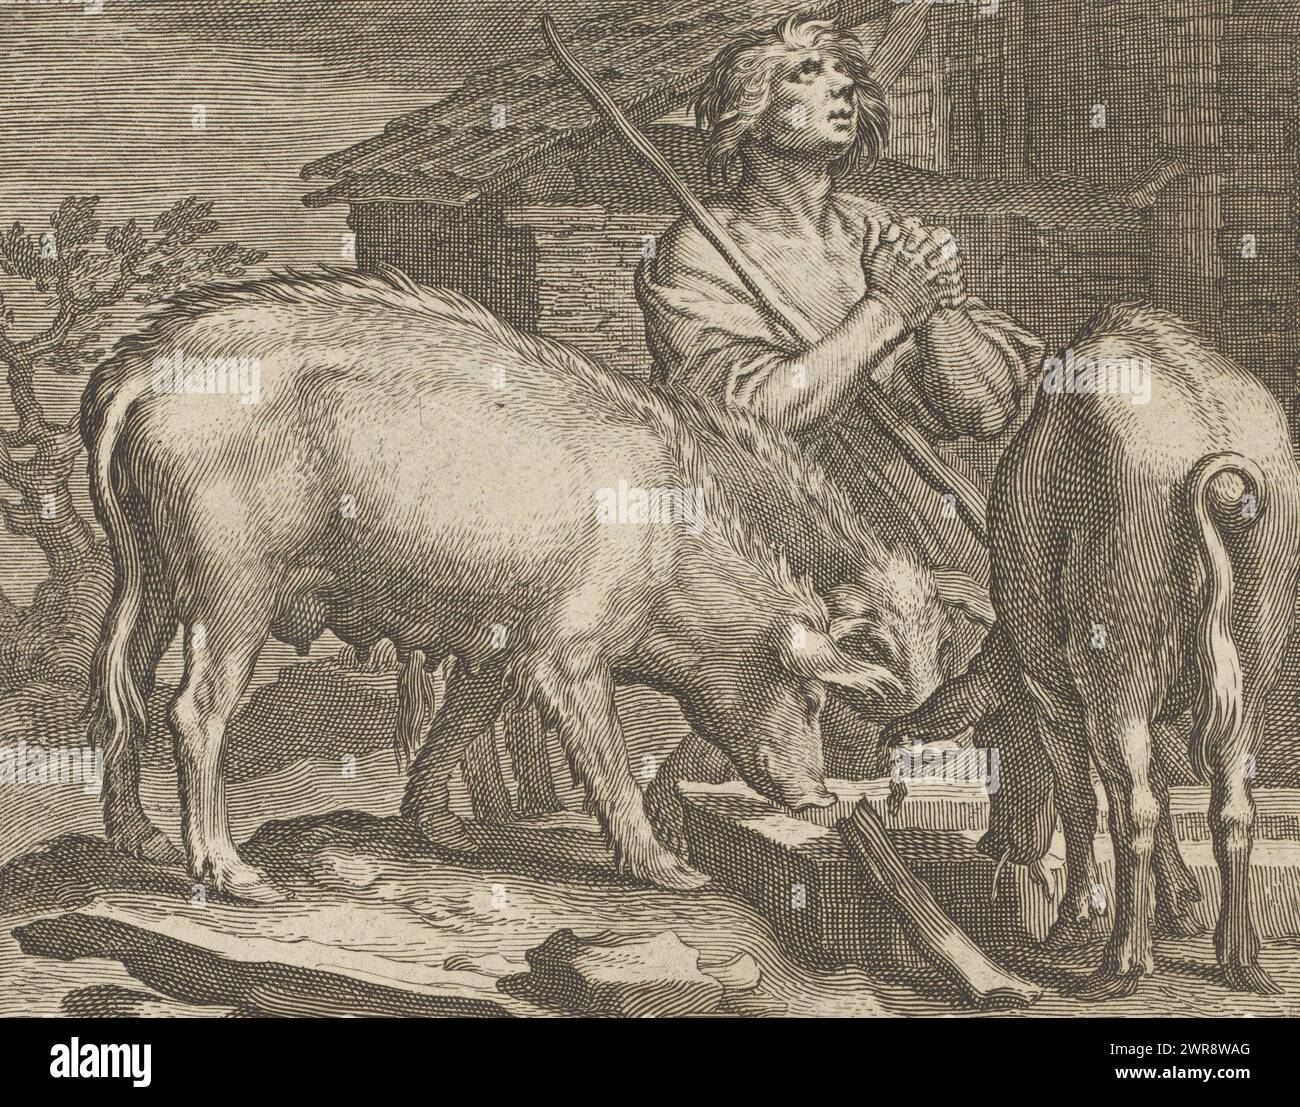 Prodigal son as swineherd with pigs at a trough, Pastorals (series title), numbered bottom right: 6., print maker: Boëtius Adamsz. Bolswert, after design by: Abraham Bloemaert, publisher: Wilhelmus Koning, (possibly), Amsterdam, 1611 - 1632 and/or c. 1717 - 1732, paper, engraving, height 114 mm × width 142 mm, print Stock Photo